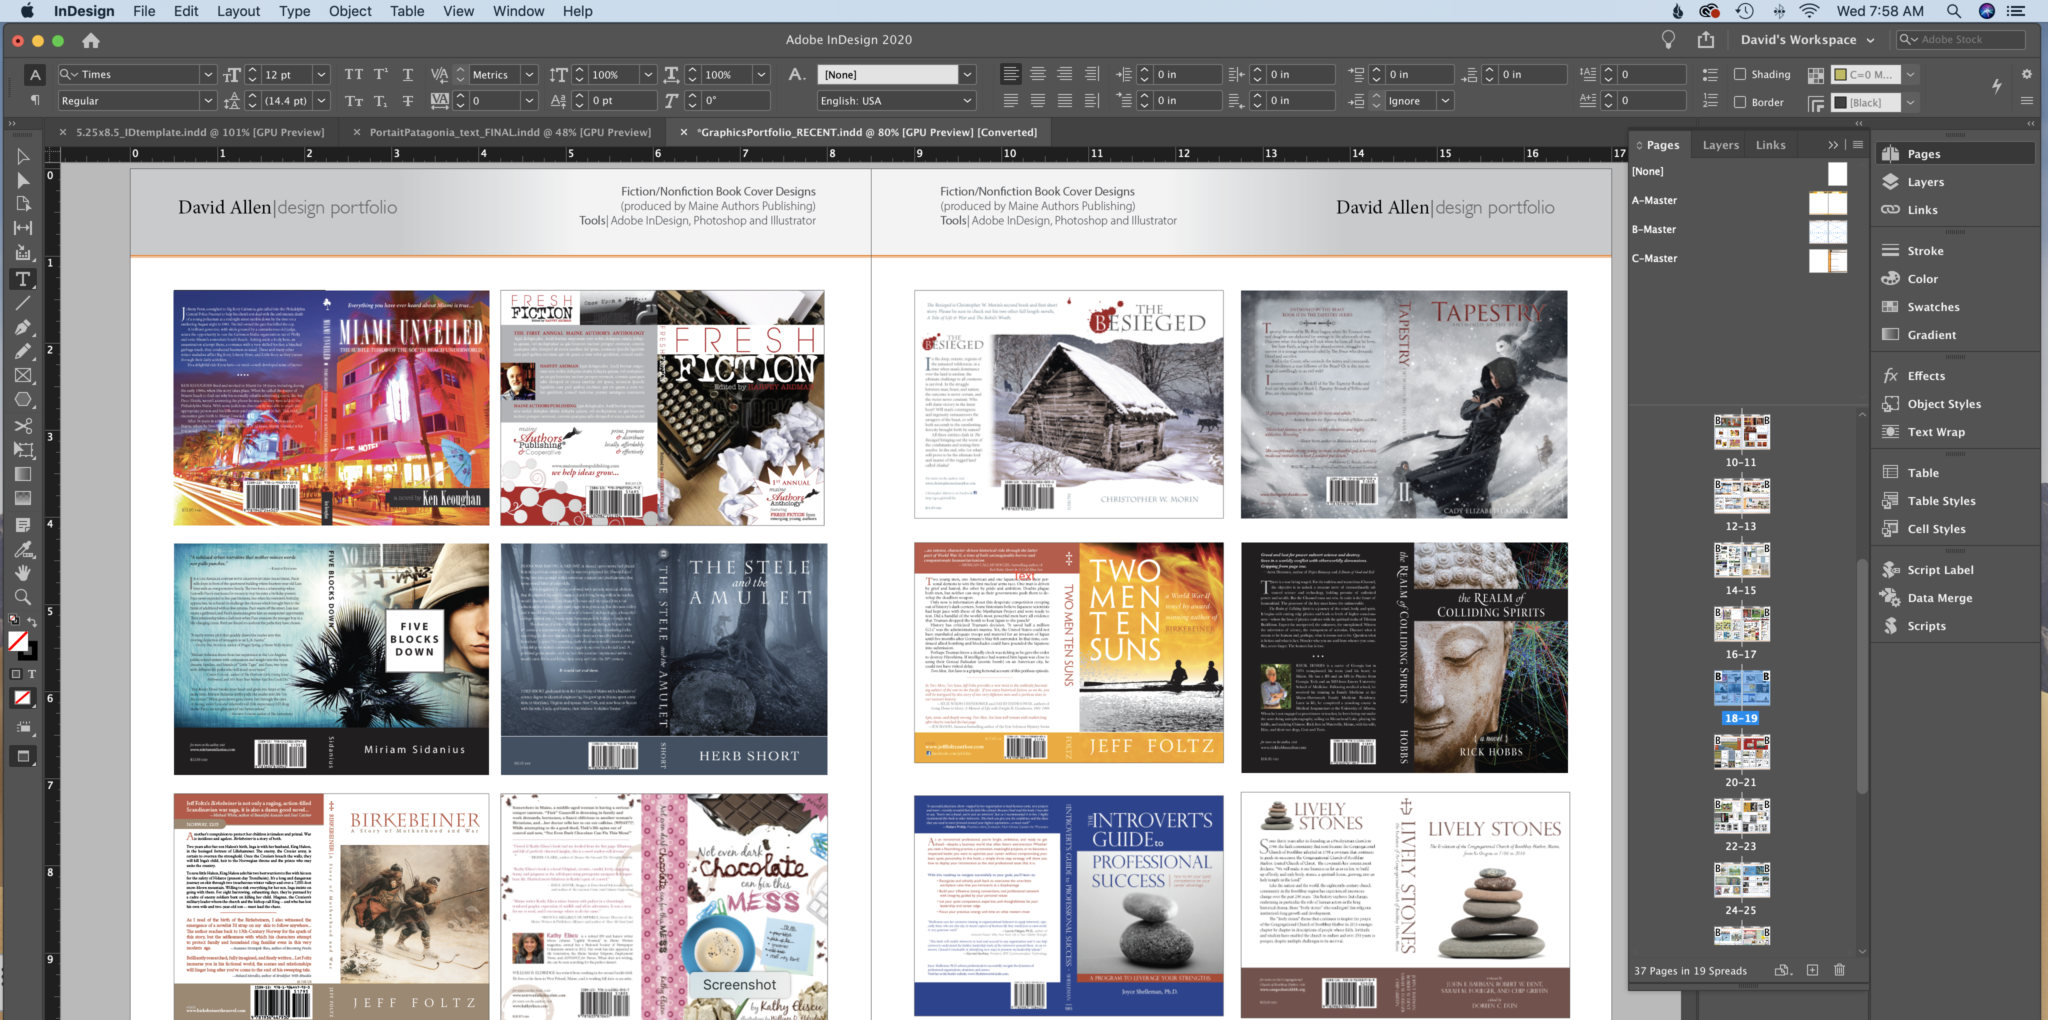 Advanced Topics in Adobe InDesign (ONLINE) - Maine Media Workshops + College